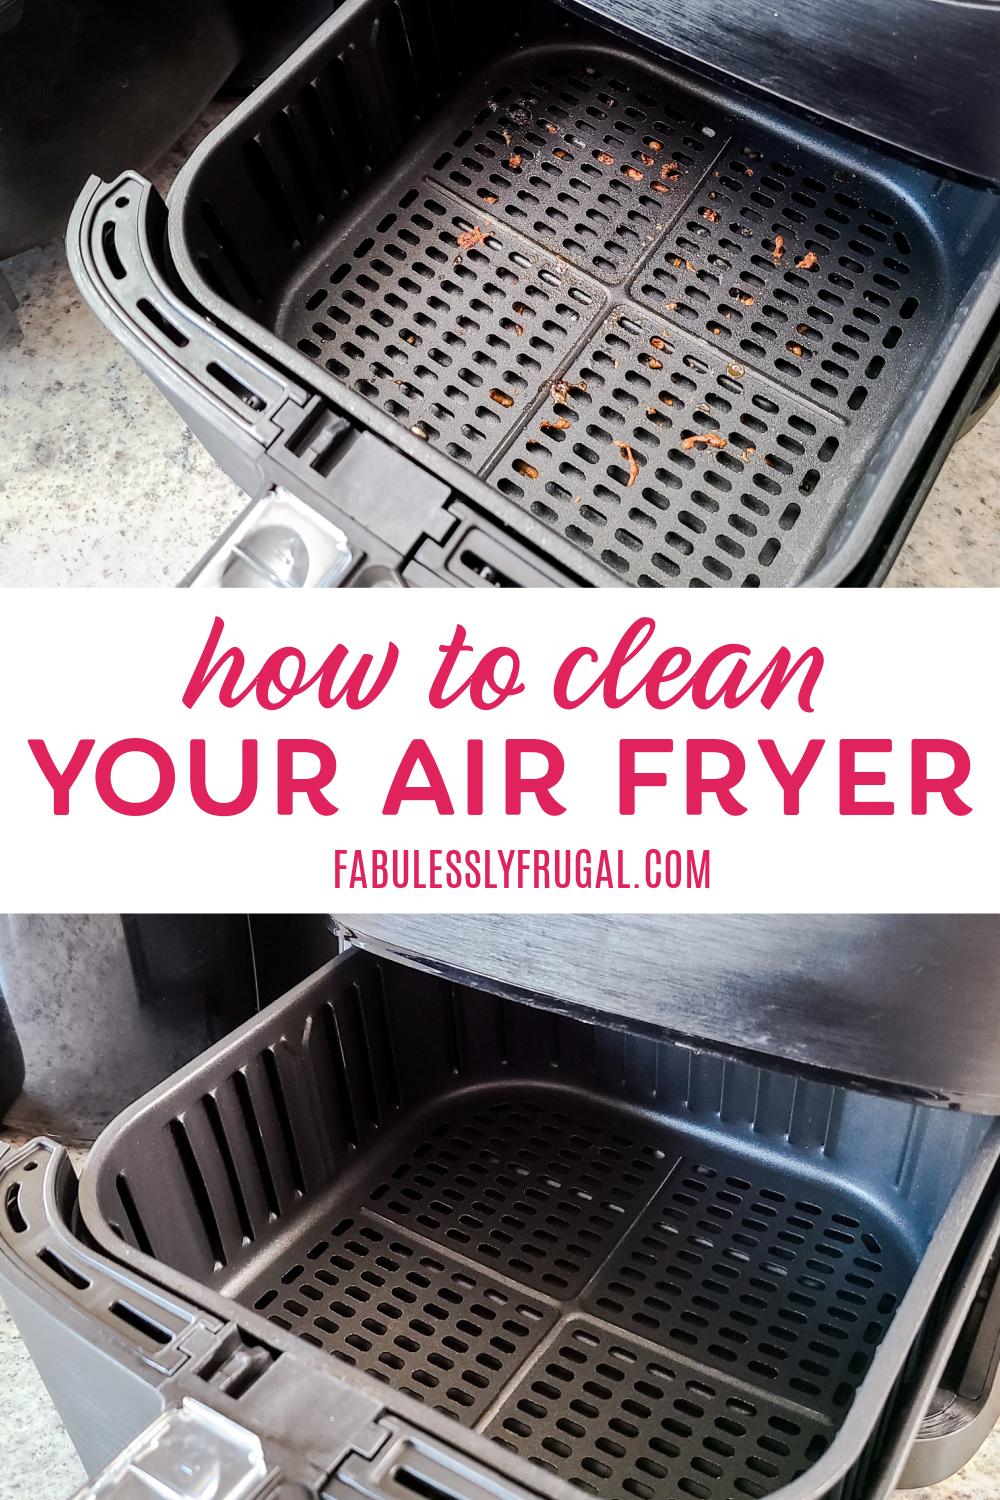 How to Deep Clean Your Air Fryer in 5 Easy Steps Recipe